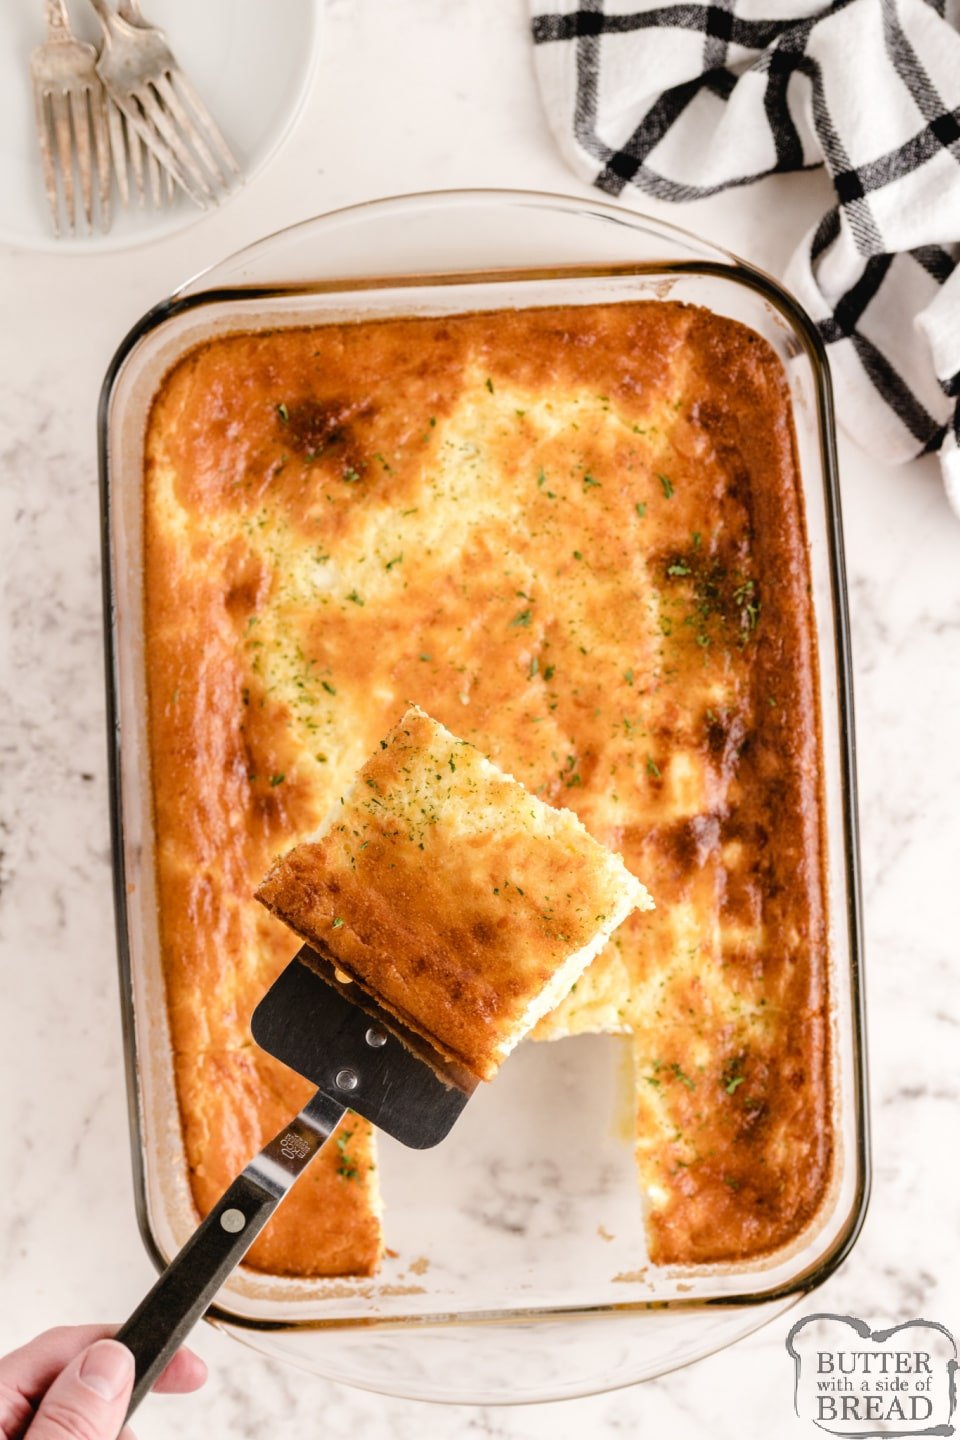 Cheesy Baked Egg Casserole made with eggs, milk and three different kinds of cheese. Perfect baked breakfast casserole recipe with tons of protein!